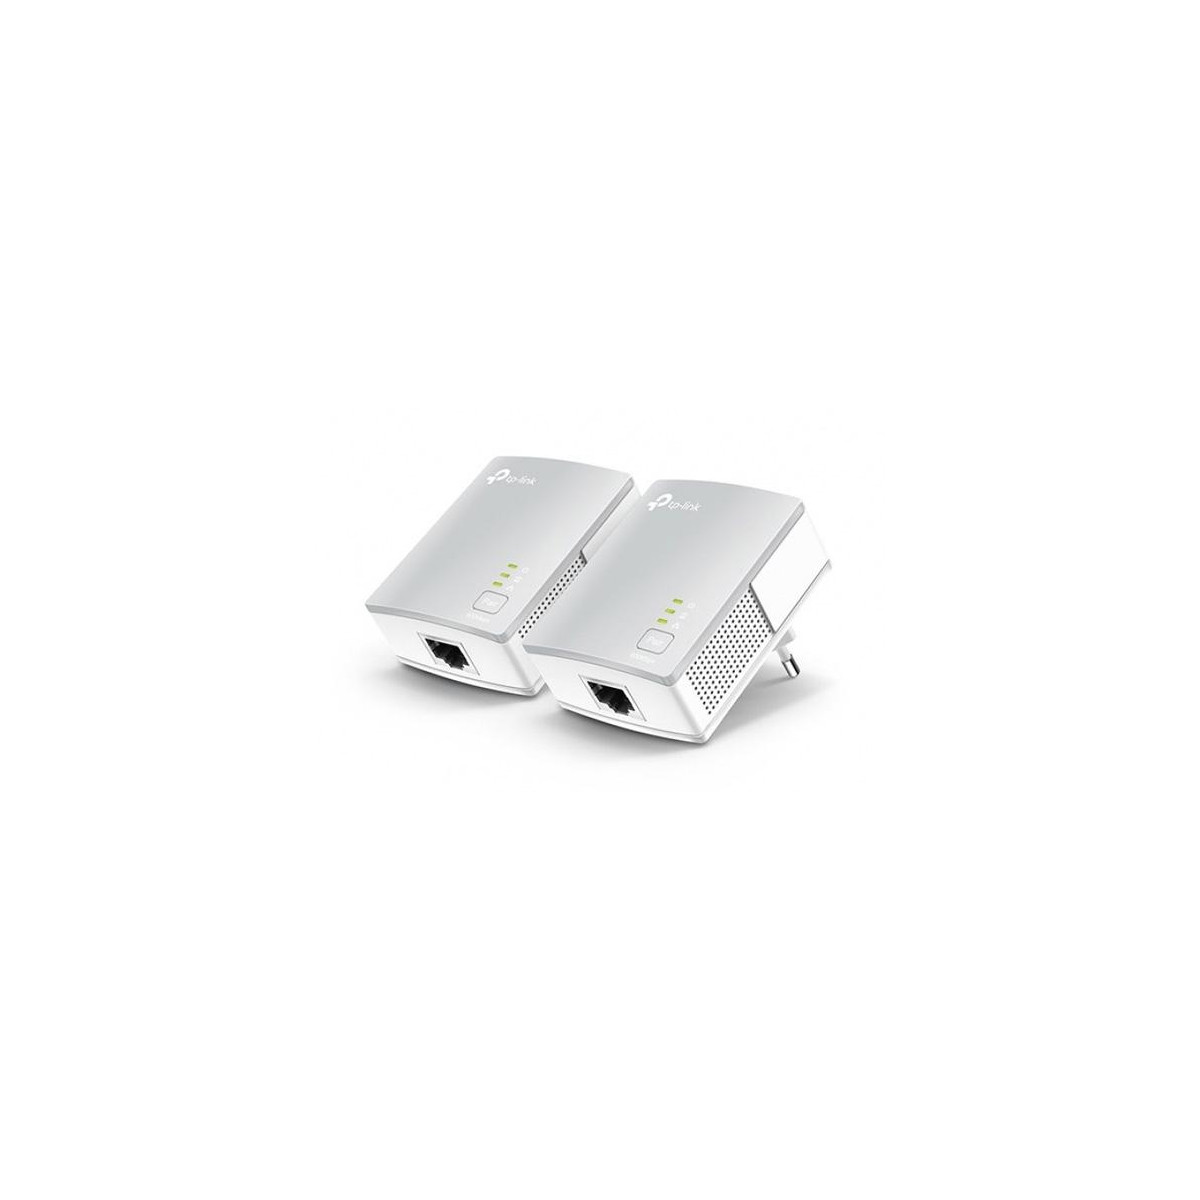 More about Repeater TP-LINK TL-PA4010